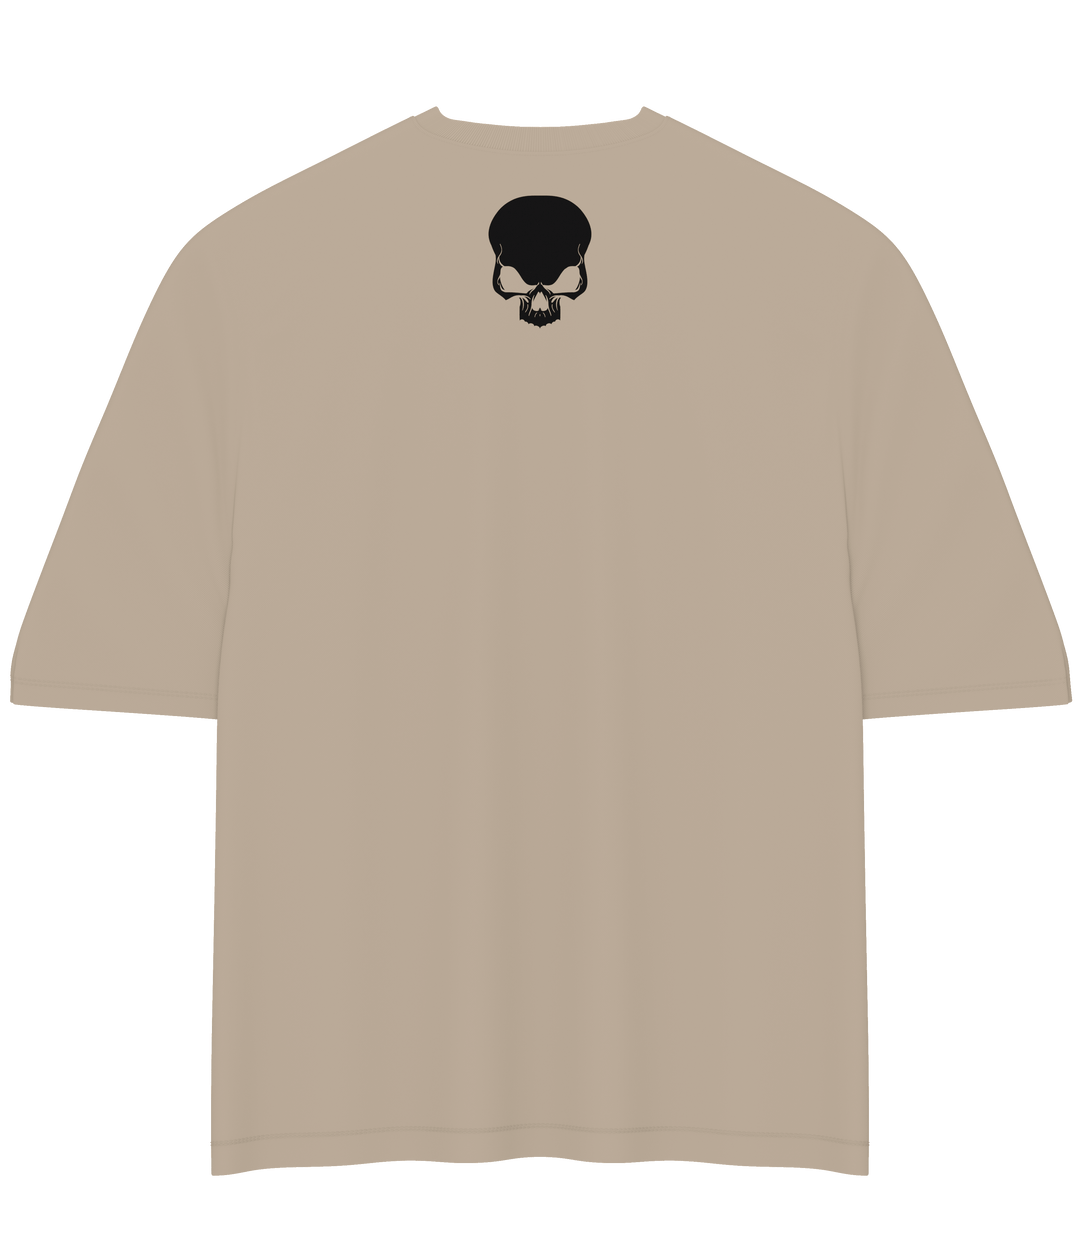 WARCRY® Oversized T-Shirt